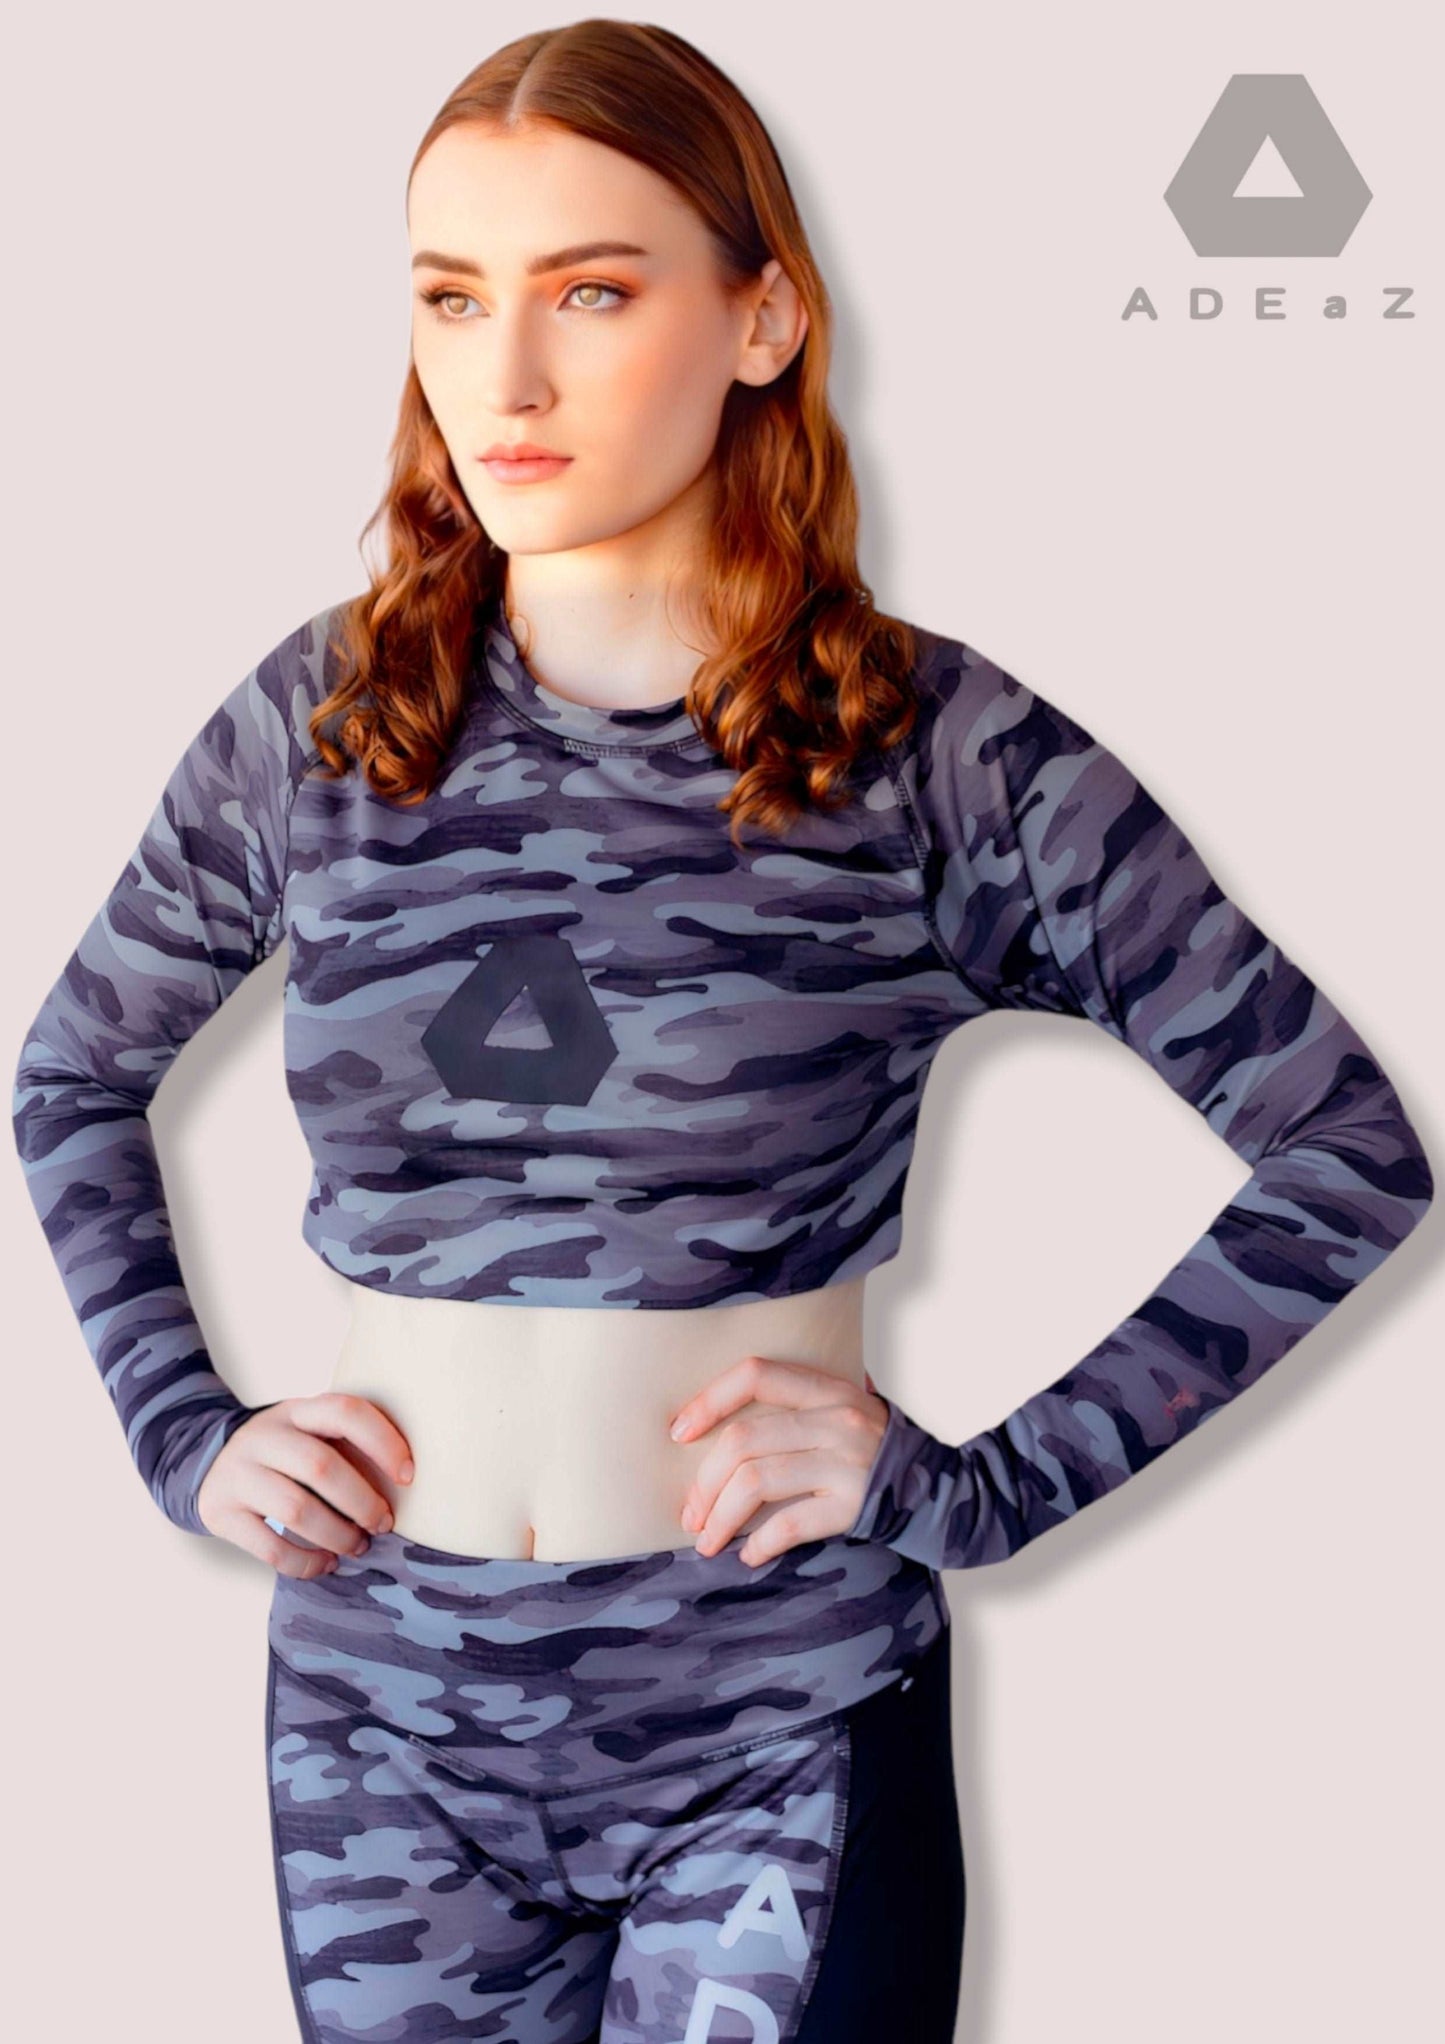 Camo Crop Top with Thumbhole: Camouflage patterned sleeveless crop top with built-in thumbholes for added style and comfort.